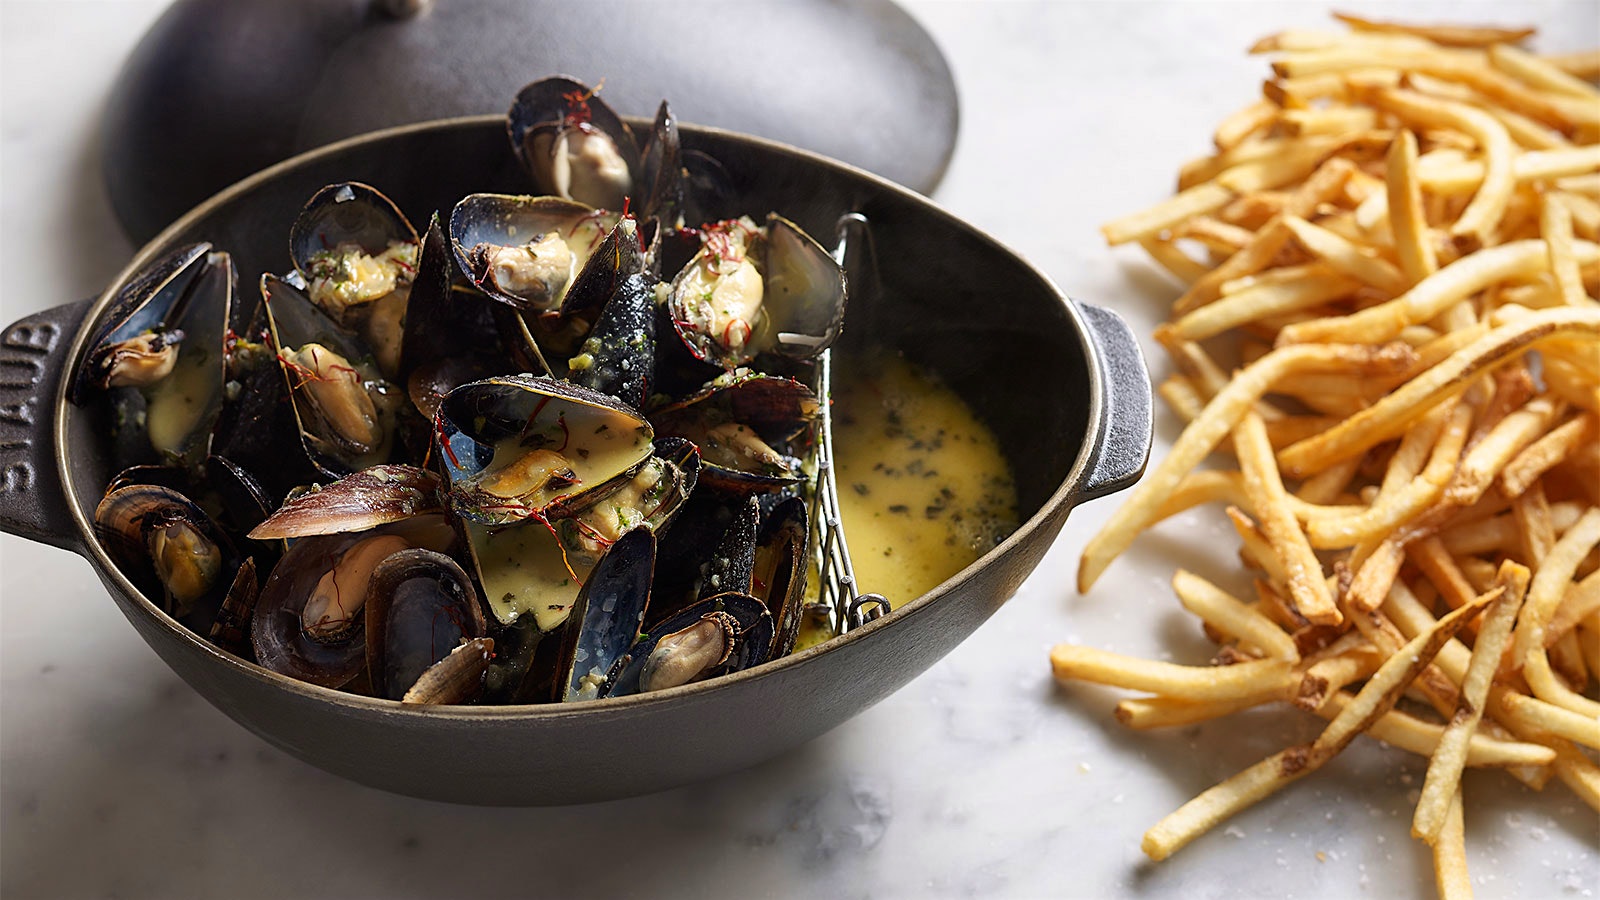  Mussels in a cast-iron bowl next to French fries at Bouchon Bistro in Coral Gables, Florida